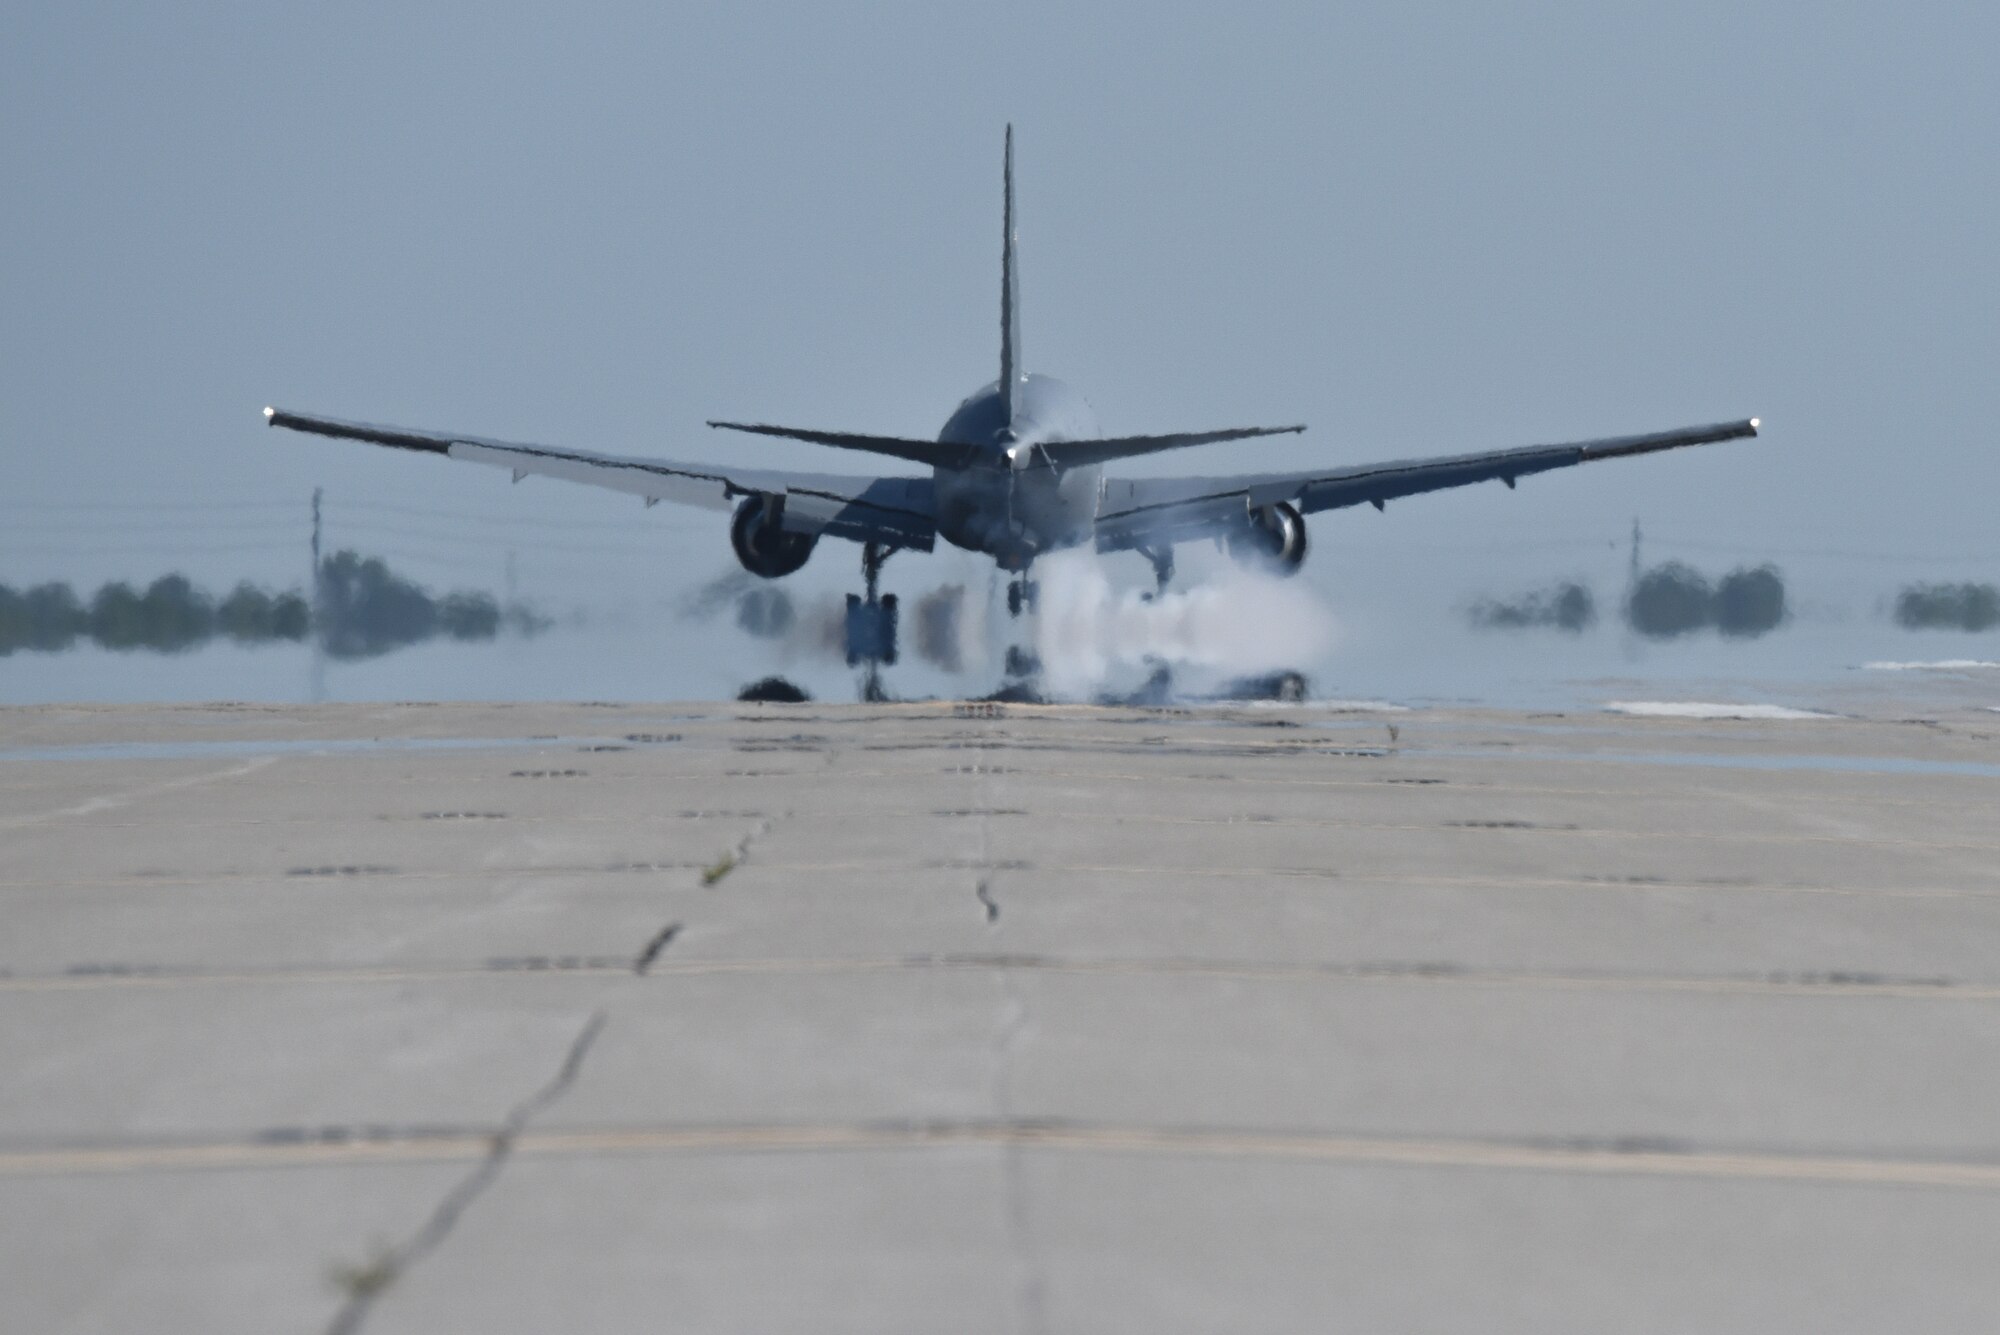 A KC-46A Pegasus lands at McConnell Air Force Base, Kan., July 19, 2019. The aircraft is the eighth addition to McConnell's Pegasus fleet. The installation will be receiving 36 total, next generation aircraft. (U.S. Air Force photo by Airman 1st Class Alexi Myrick)